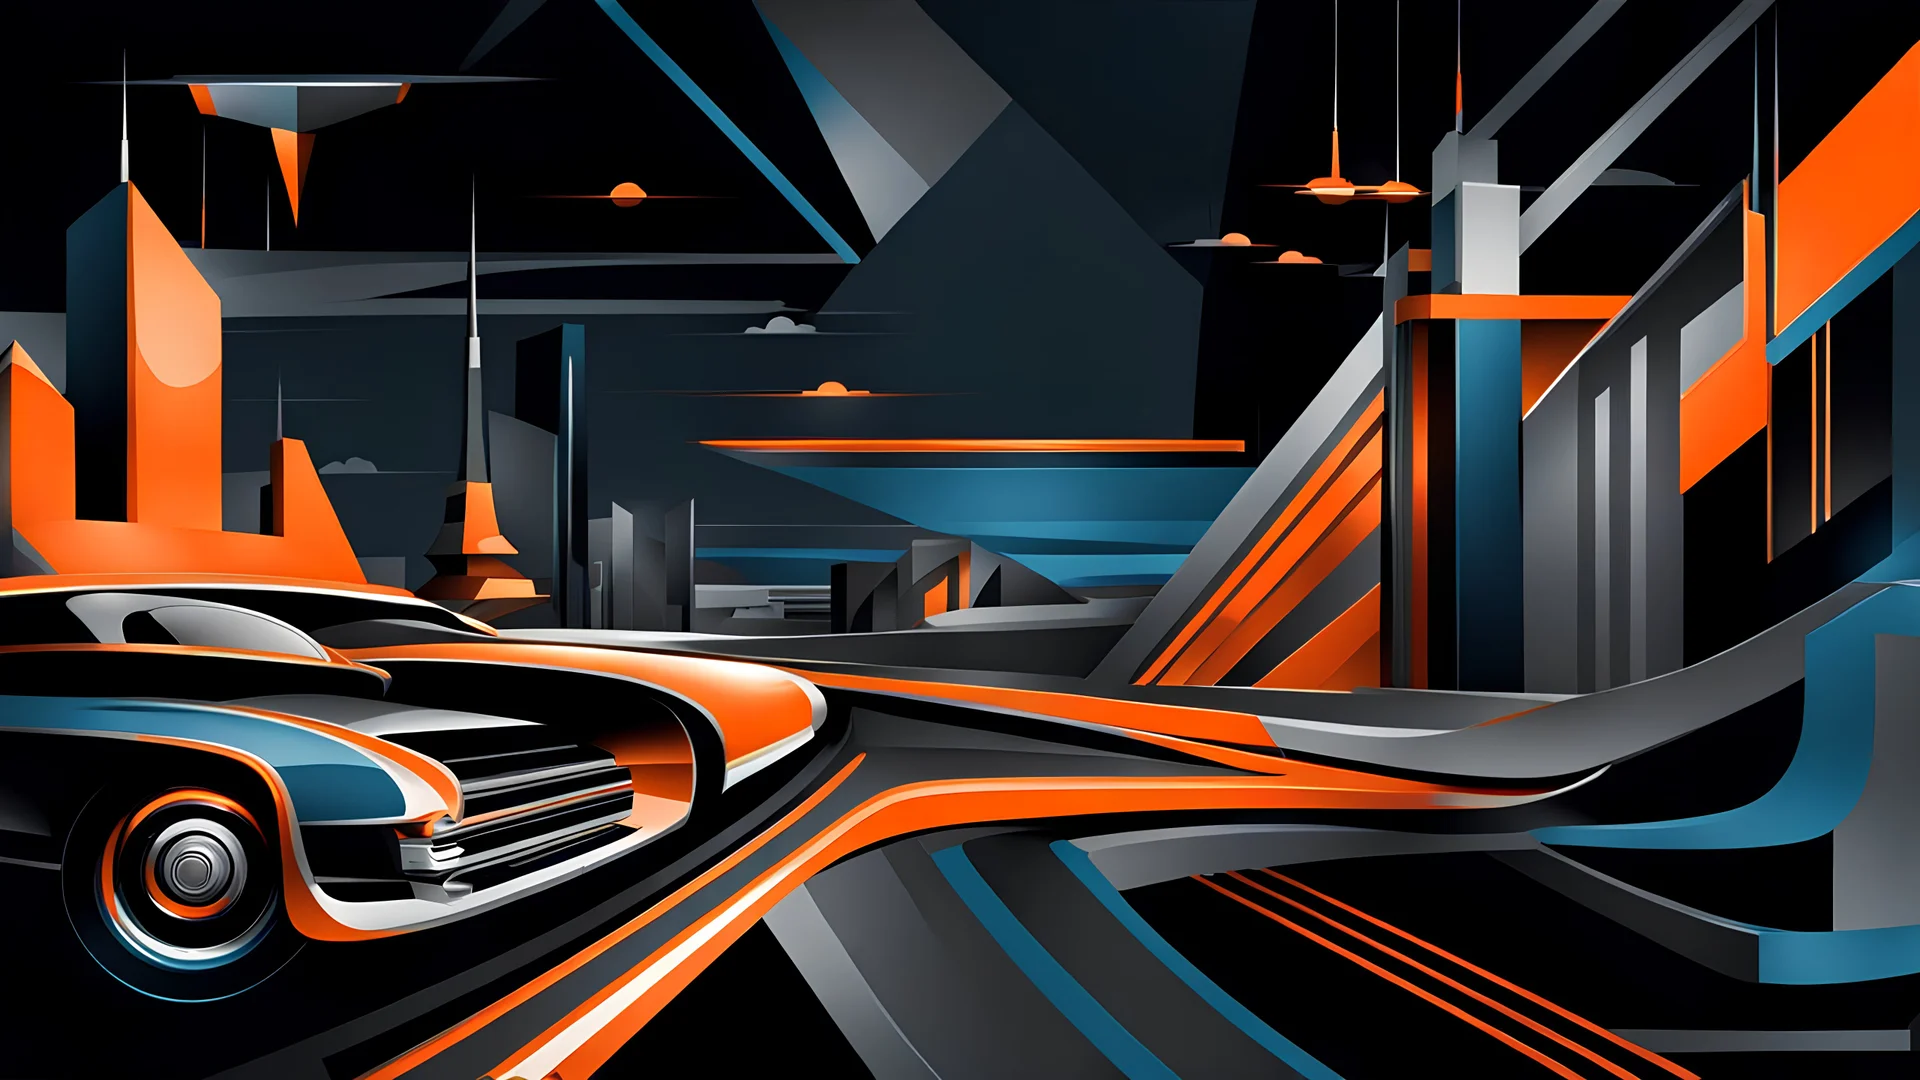 retro futurism style hustle and bustle, zipping dynamics, loop kick, deconstruct:23, colors of metallic orange and steel blue